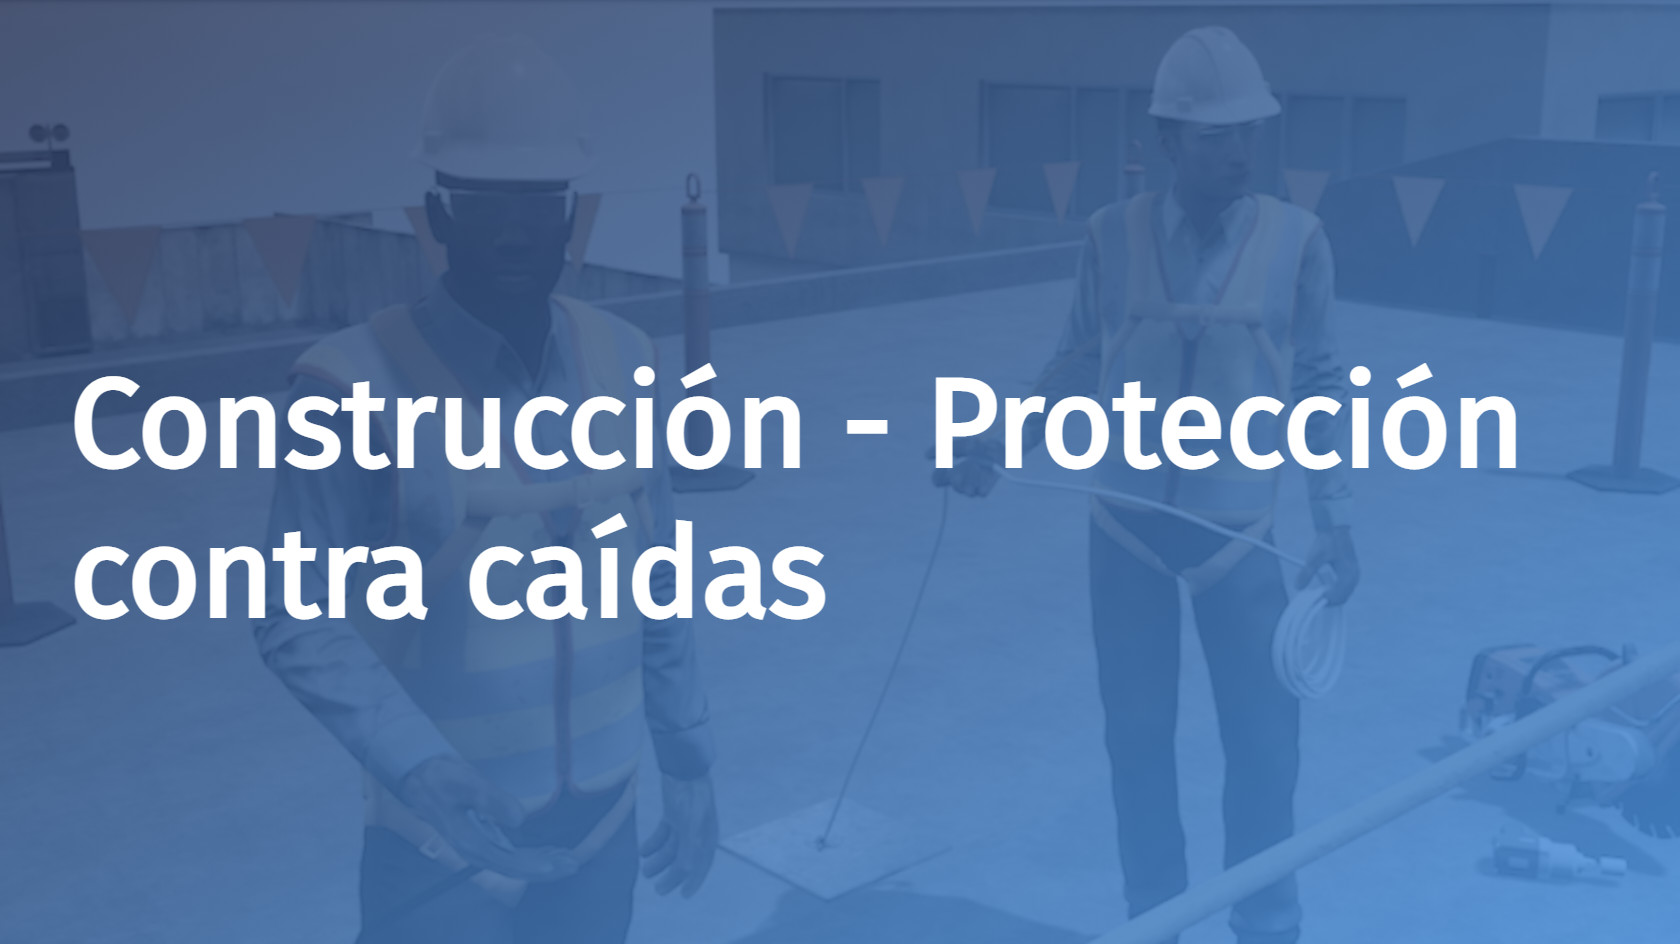 Spanish - Construction - Fall Protection